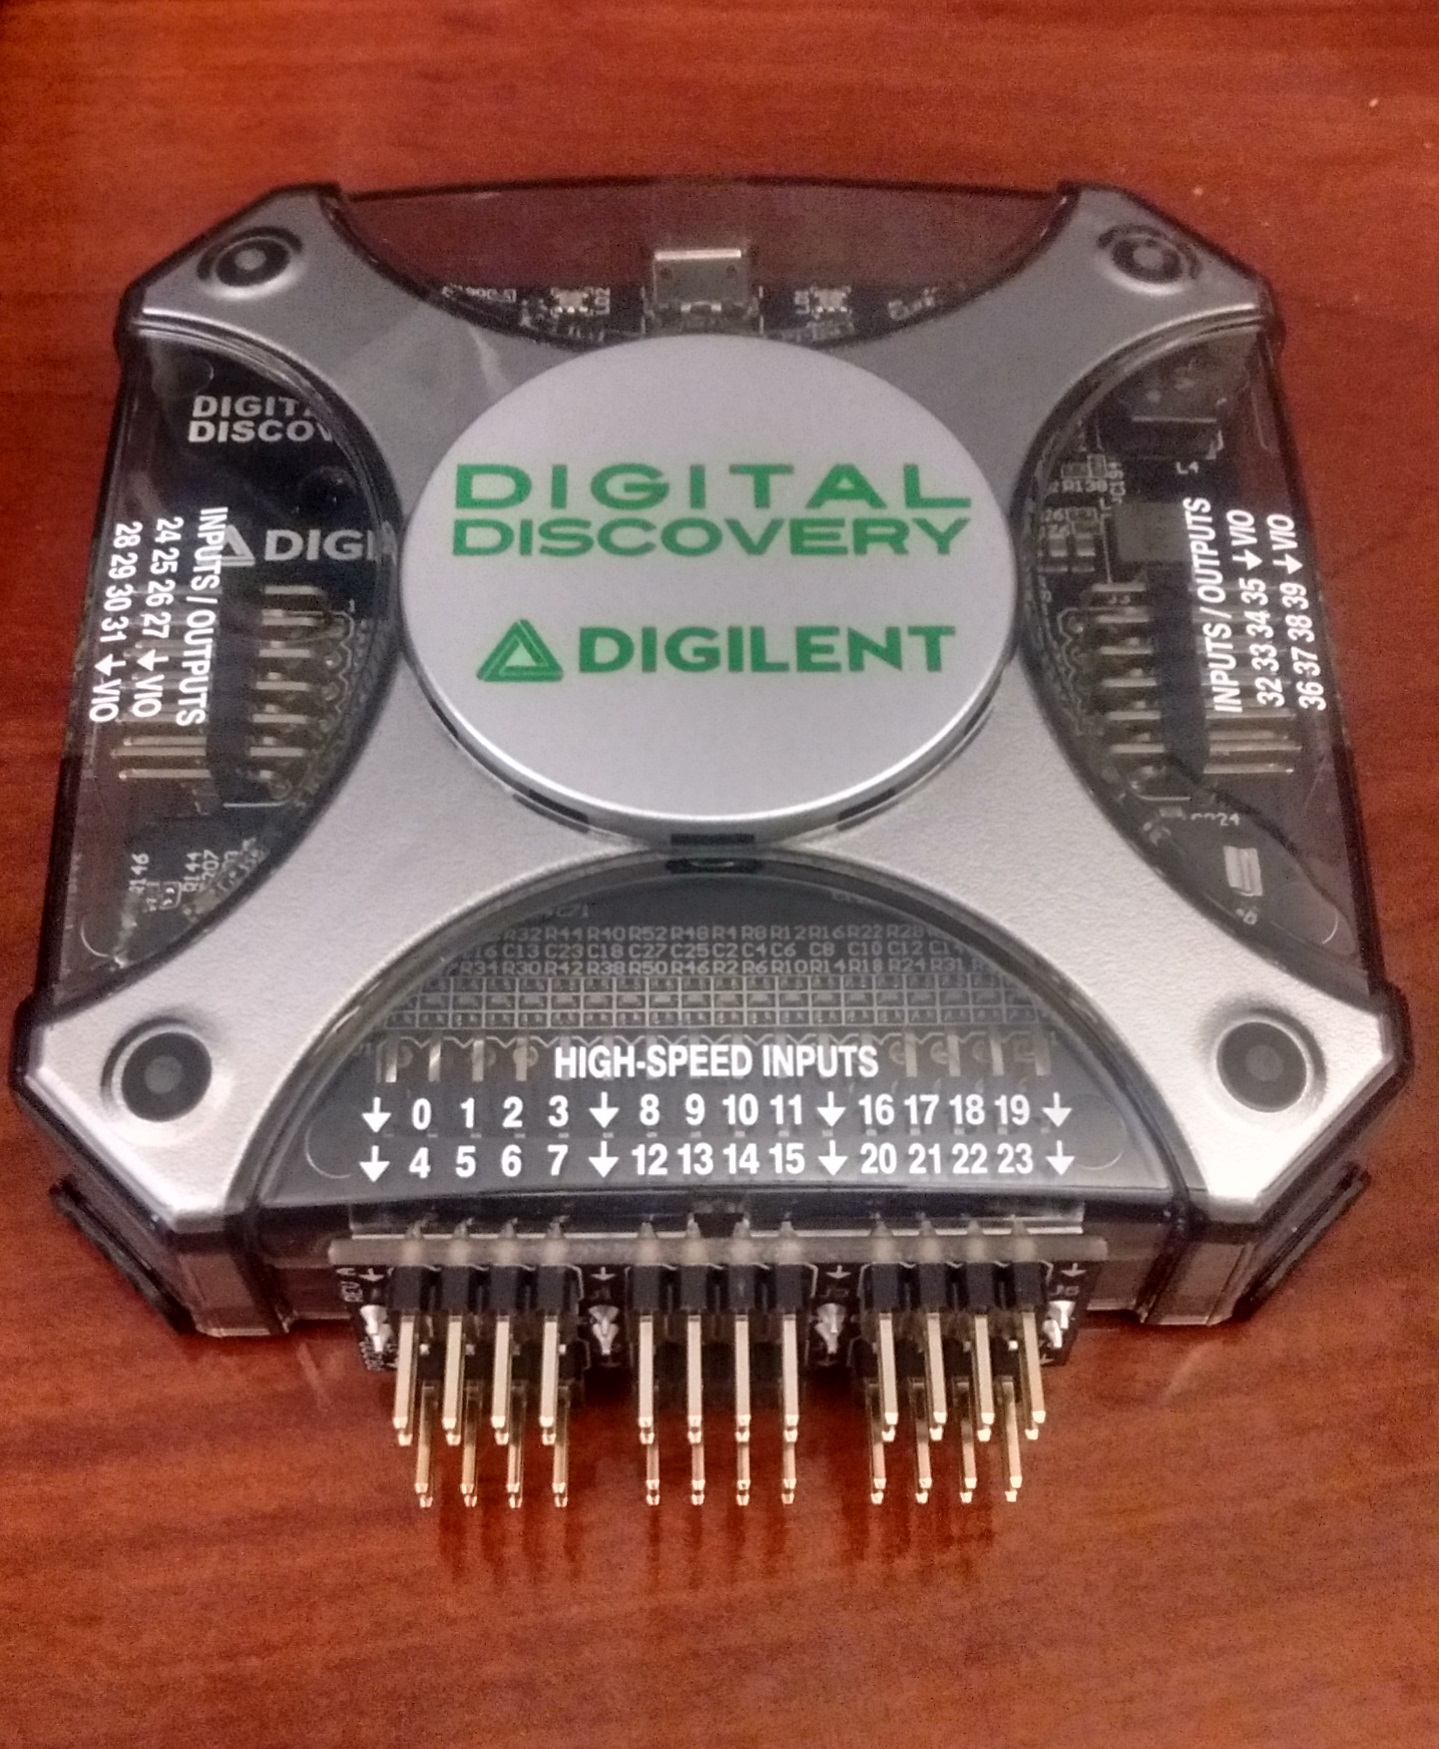  High Speed Adapter attached to the Digital Discovery